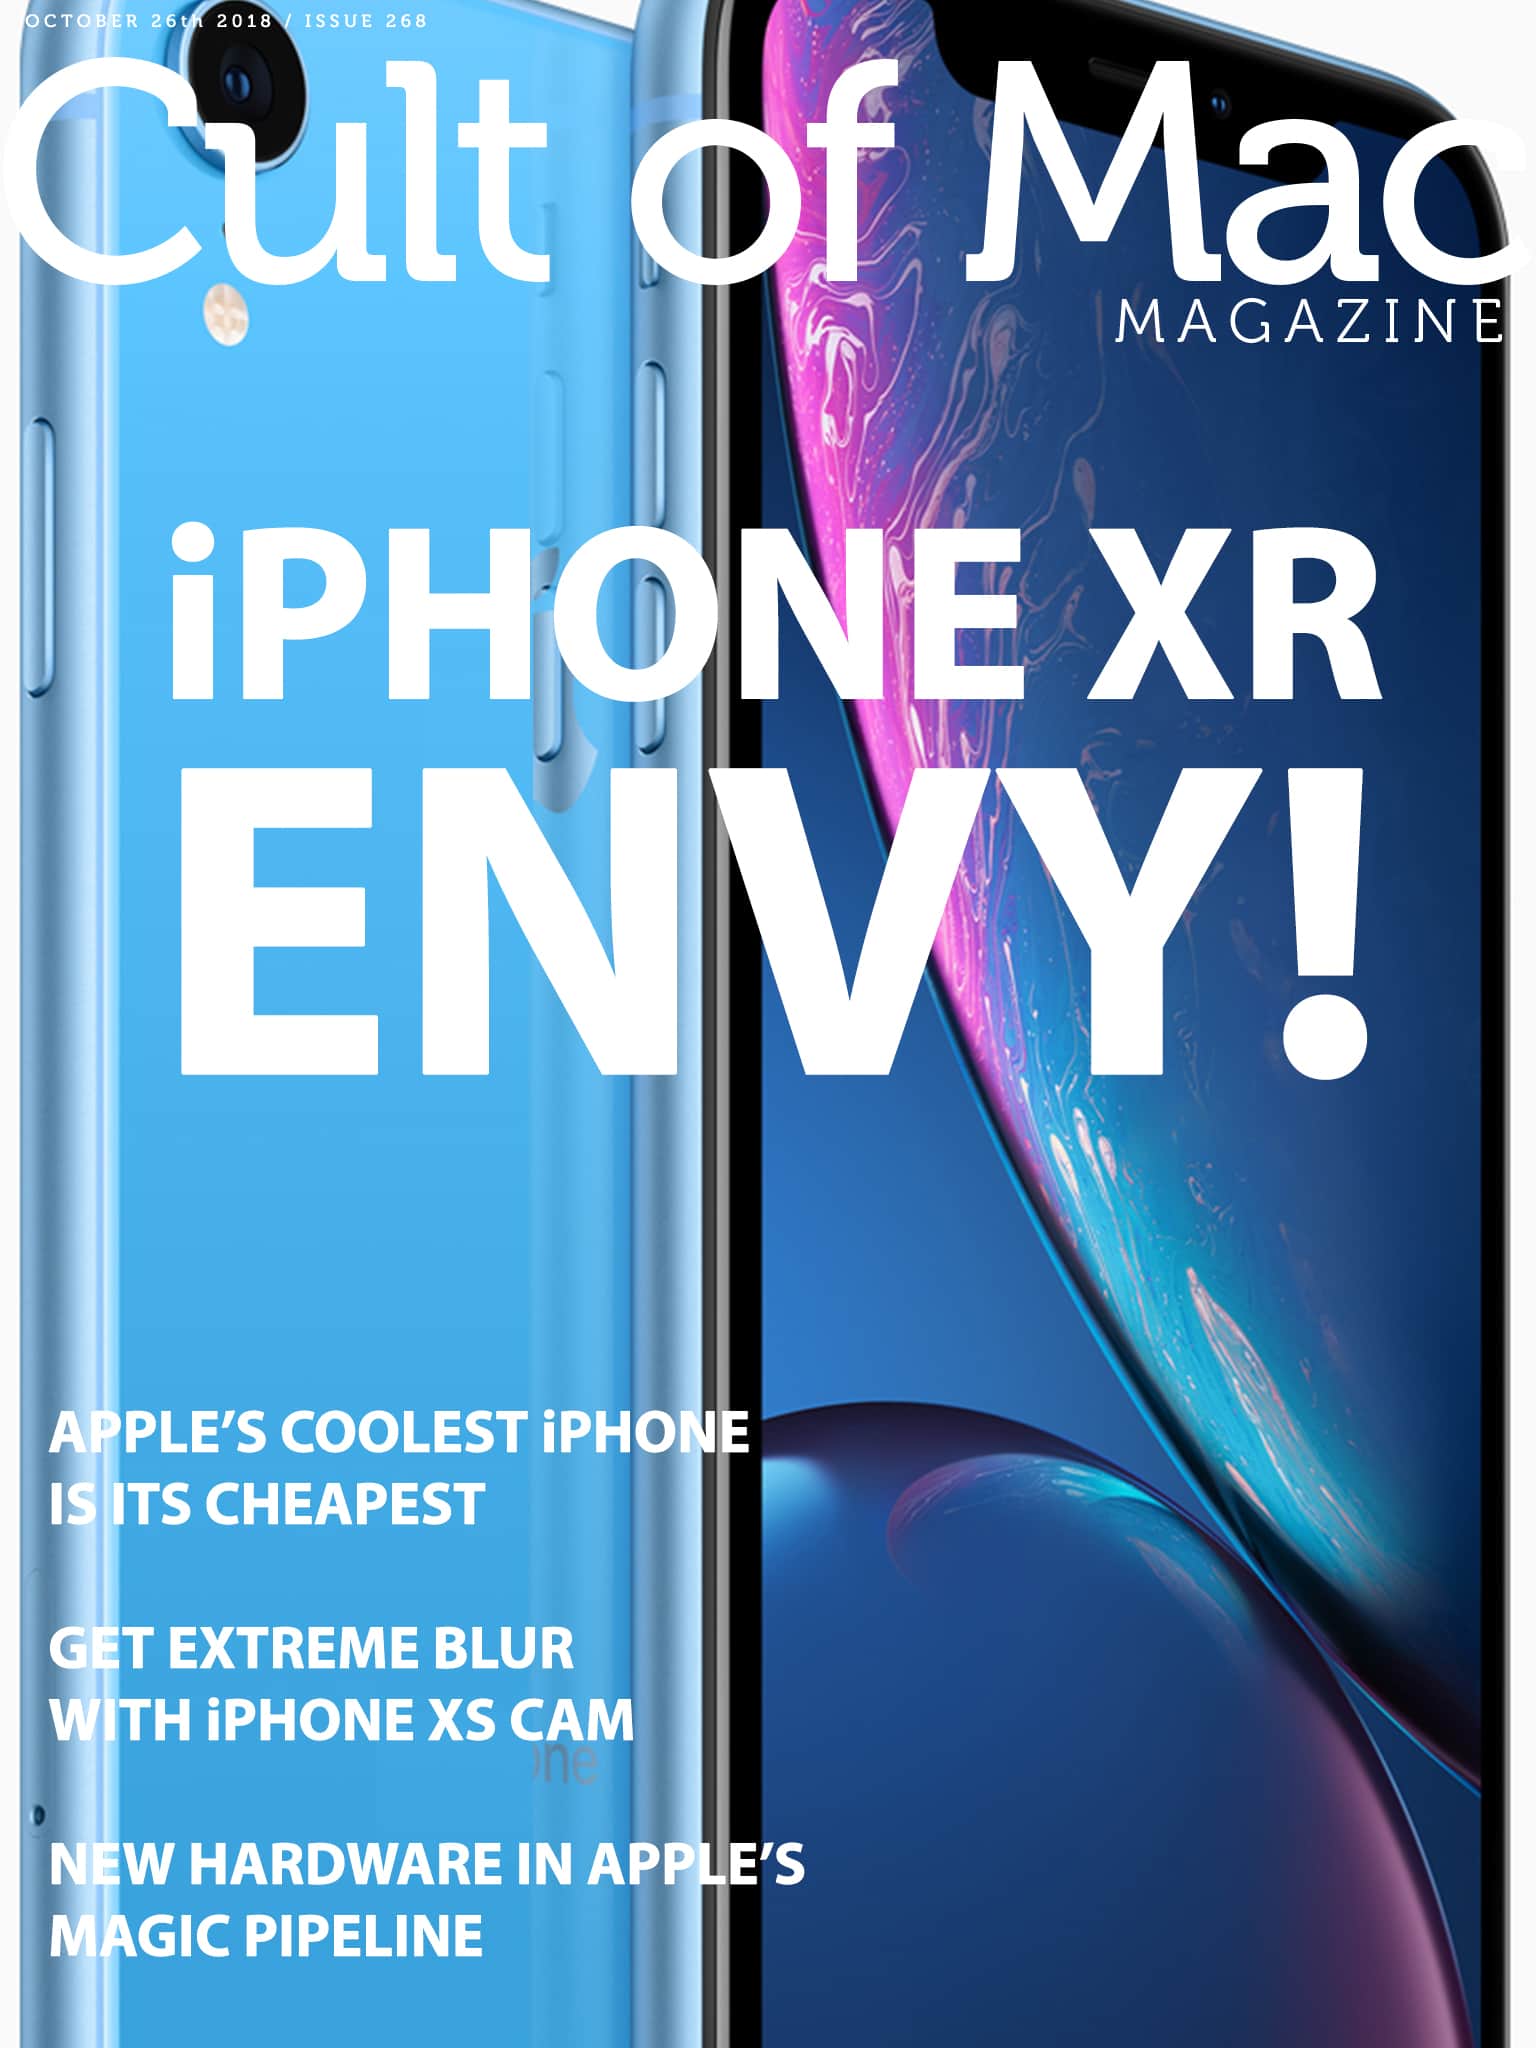 Just how good is the iPhone XR? We're head over heels! Read all about it in Cult of Mac Magazine Issue No. 268.